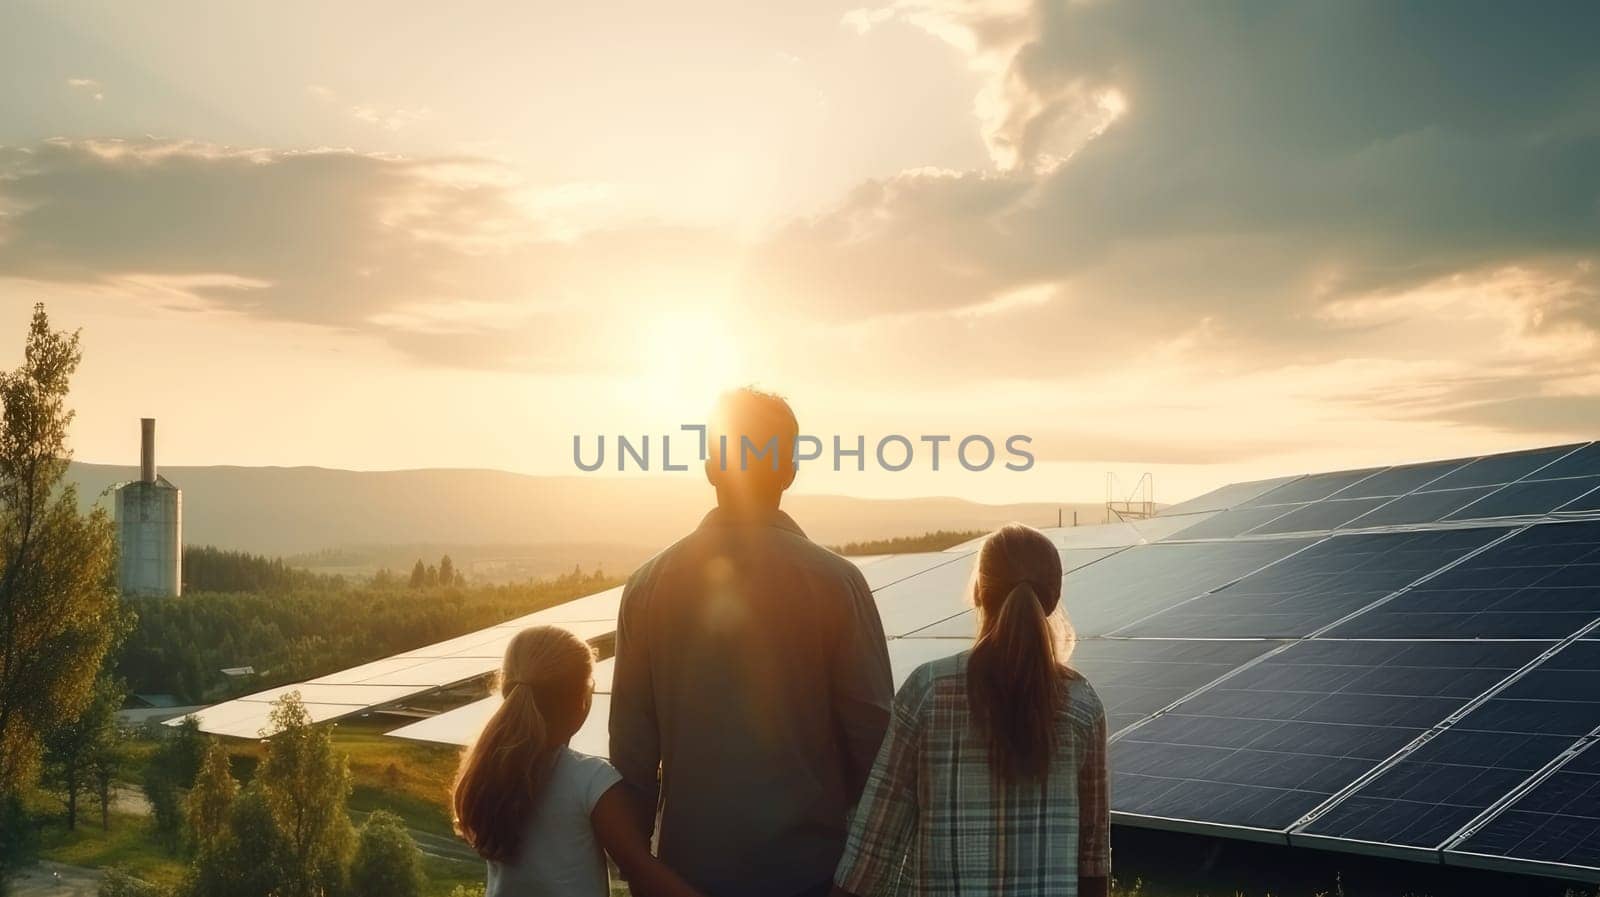 Family, children, man uses solar panel and windmill on the street. Renewable energy source energy. Green energy, energy saving, caring attitude of men and women towards the environment and nature. Clean energy demonstrating sustainable energy sources